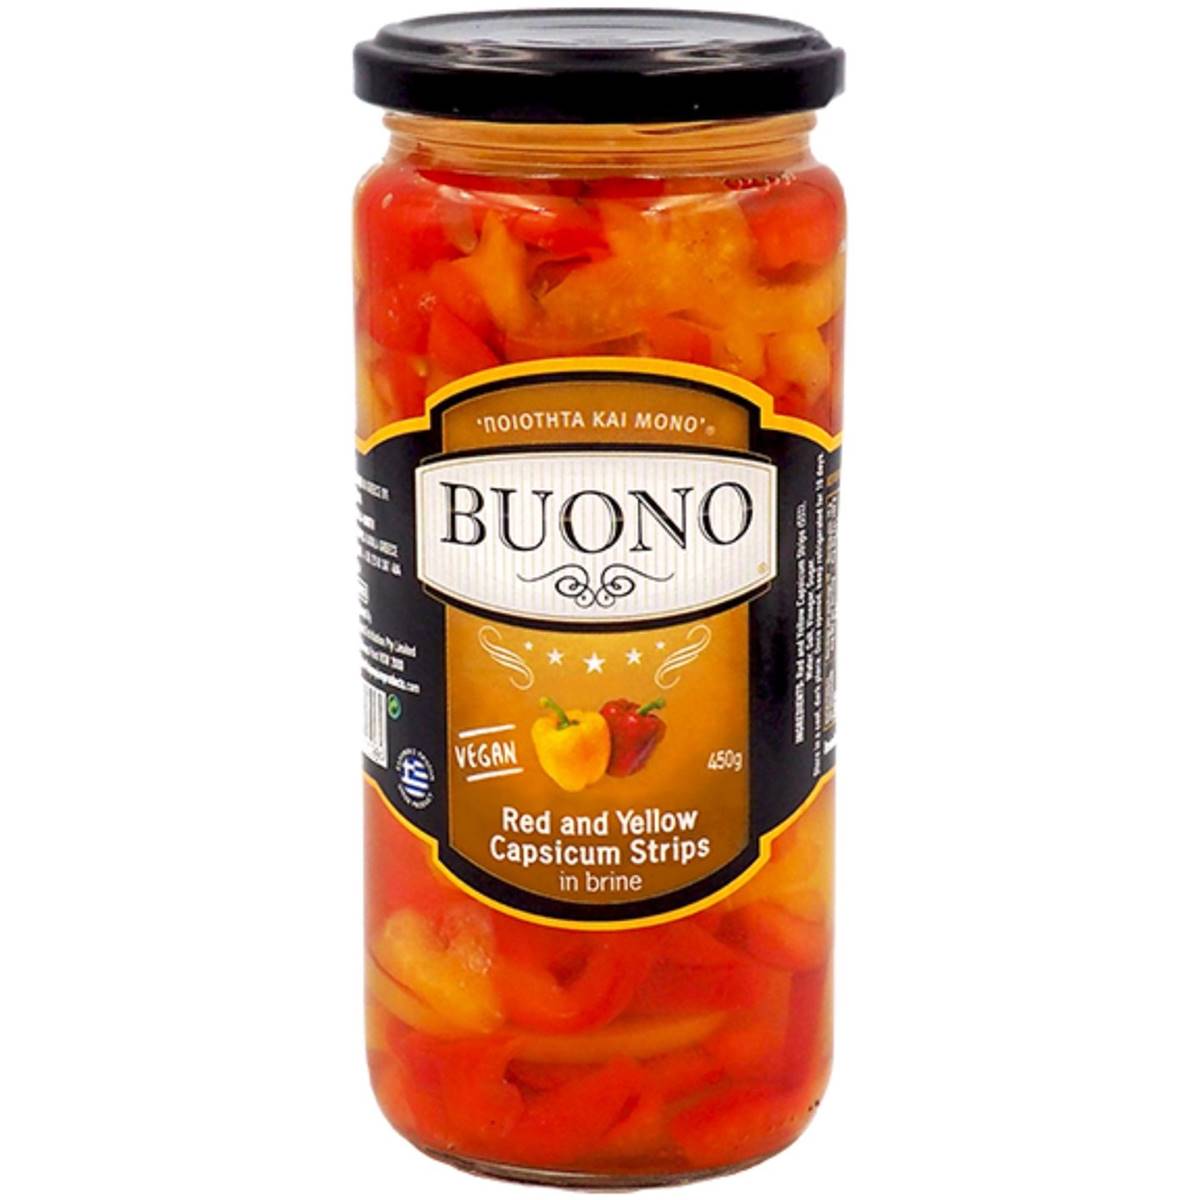 Calories in Buono Red And Yellow Capsicum Strips In Brine